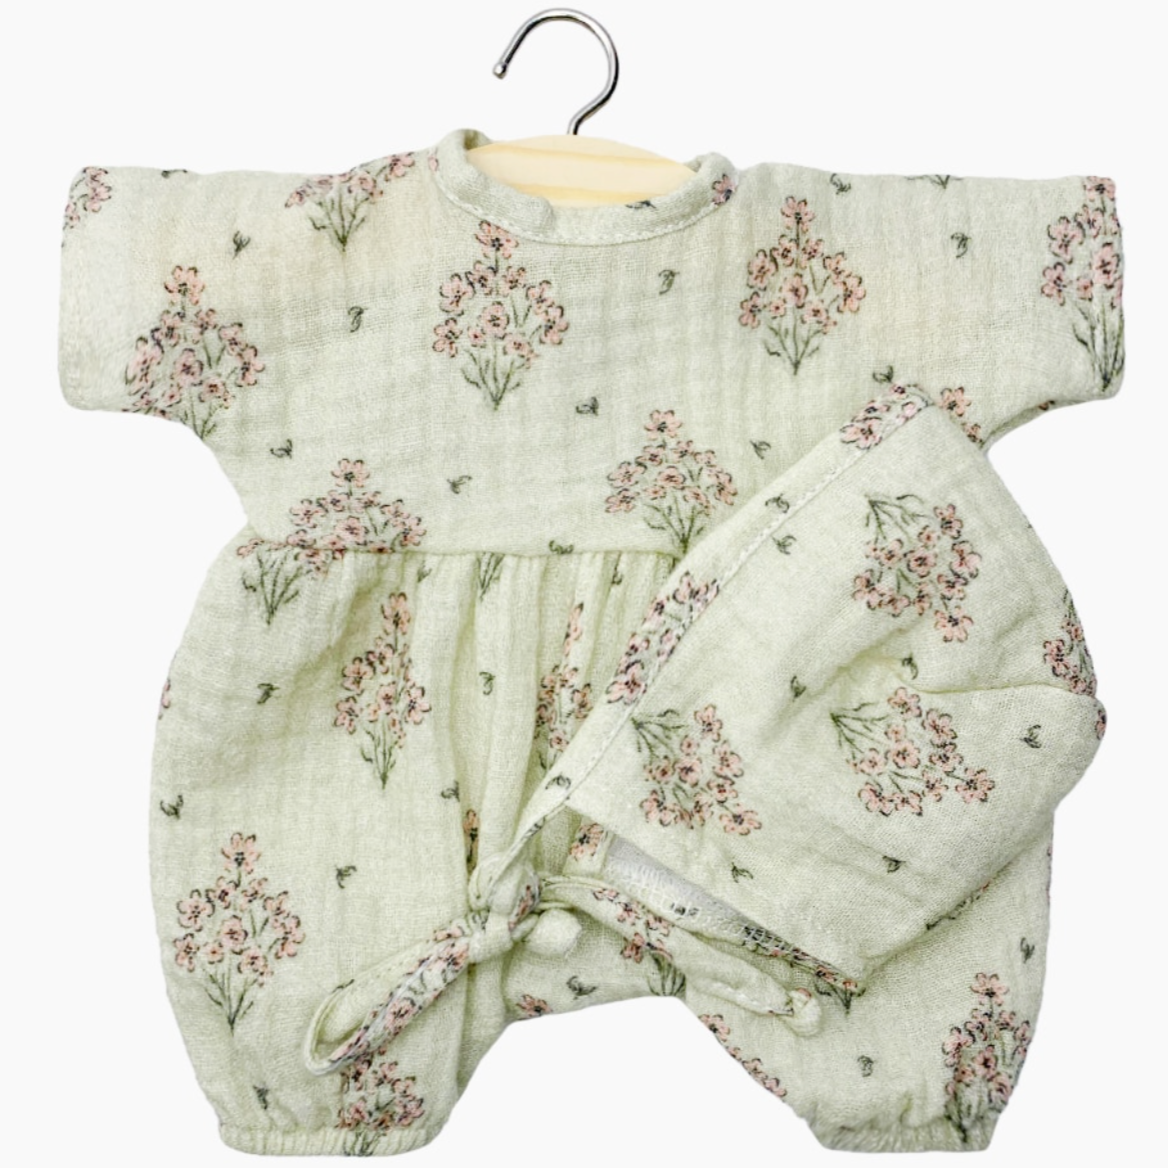 Noa Romper with Beguin Bonnet for Minikane Soft-bodied Babies in "flowers of the field" print